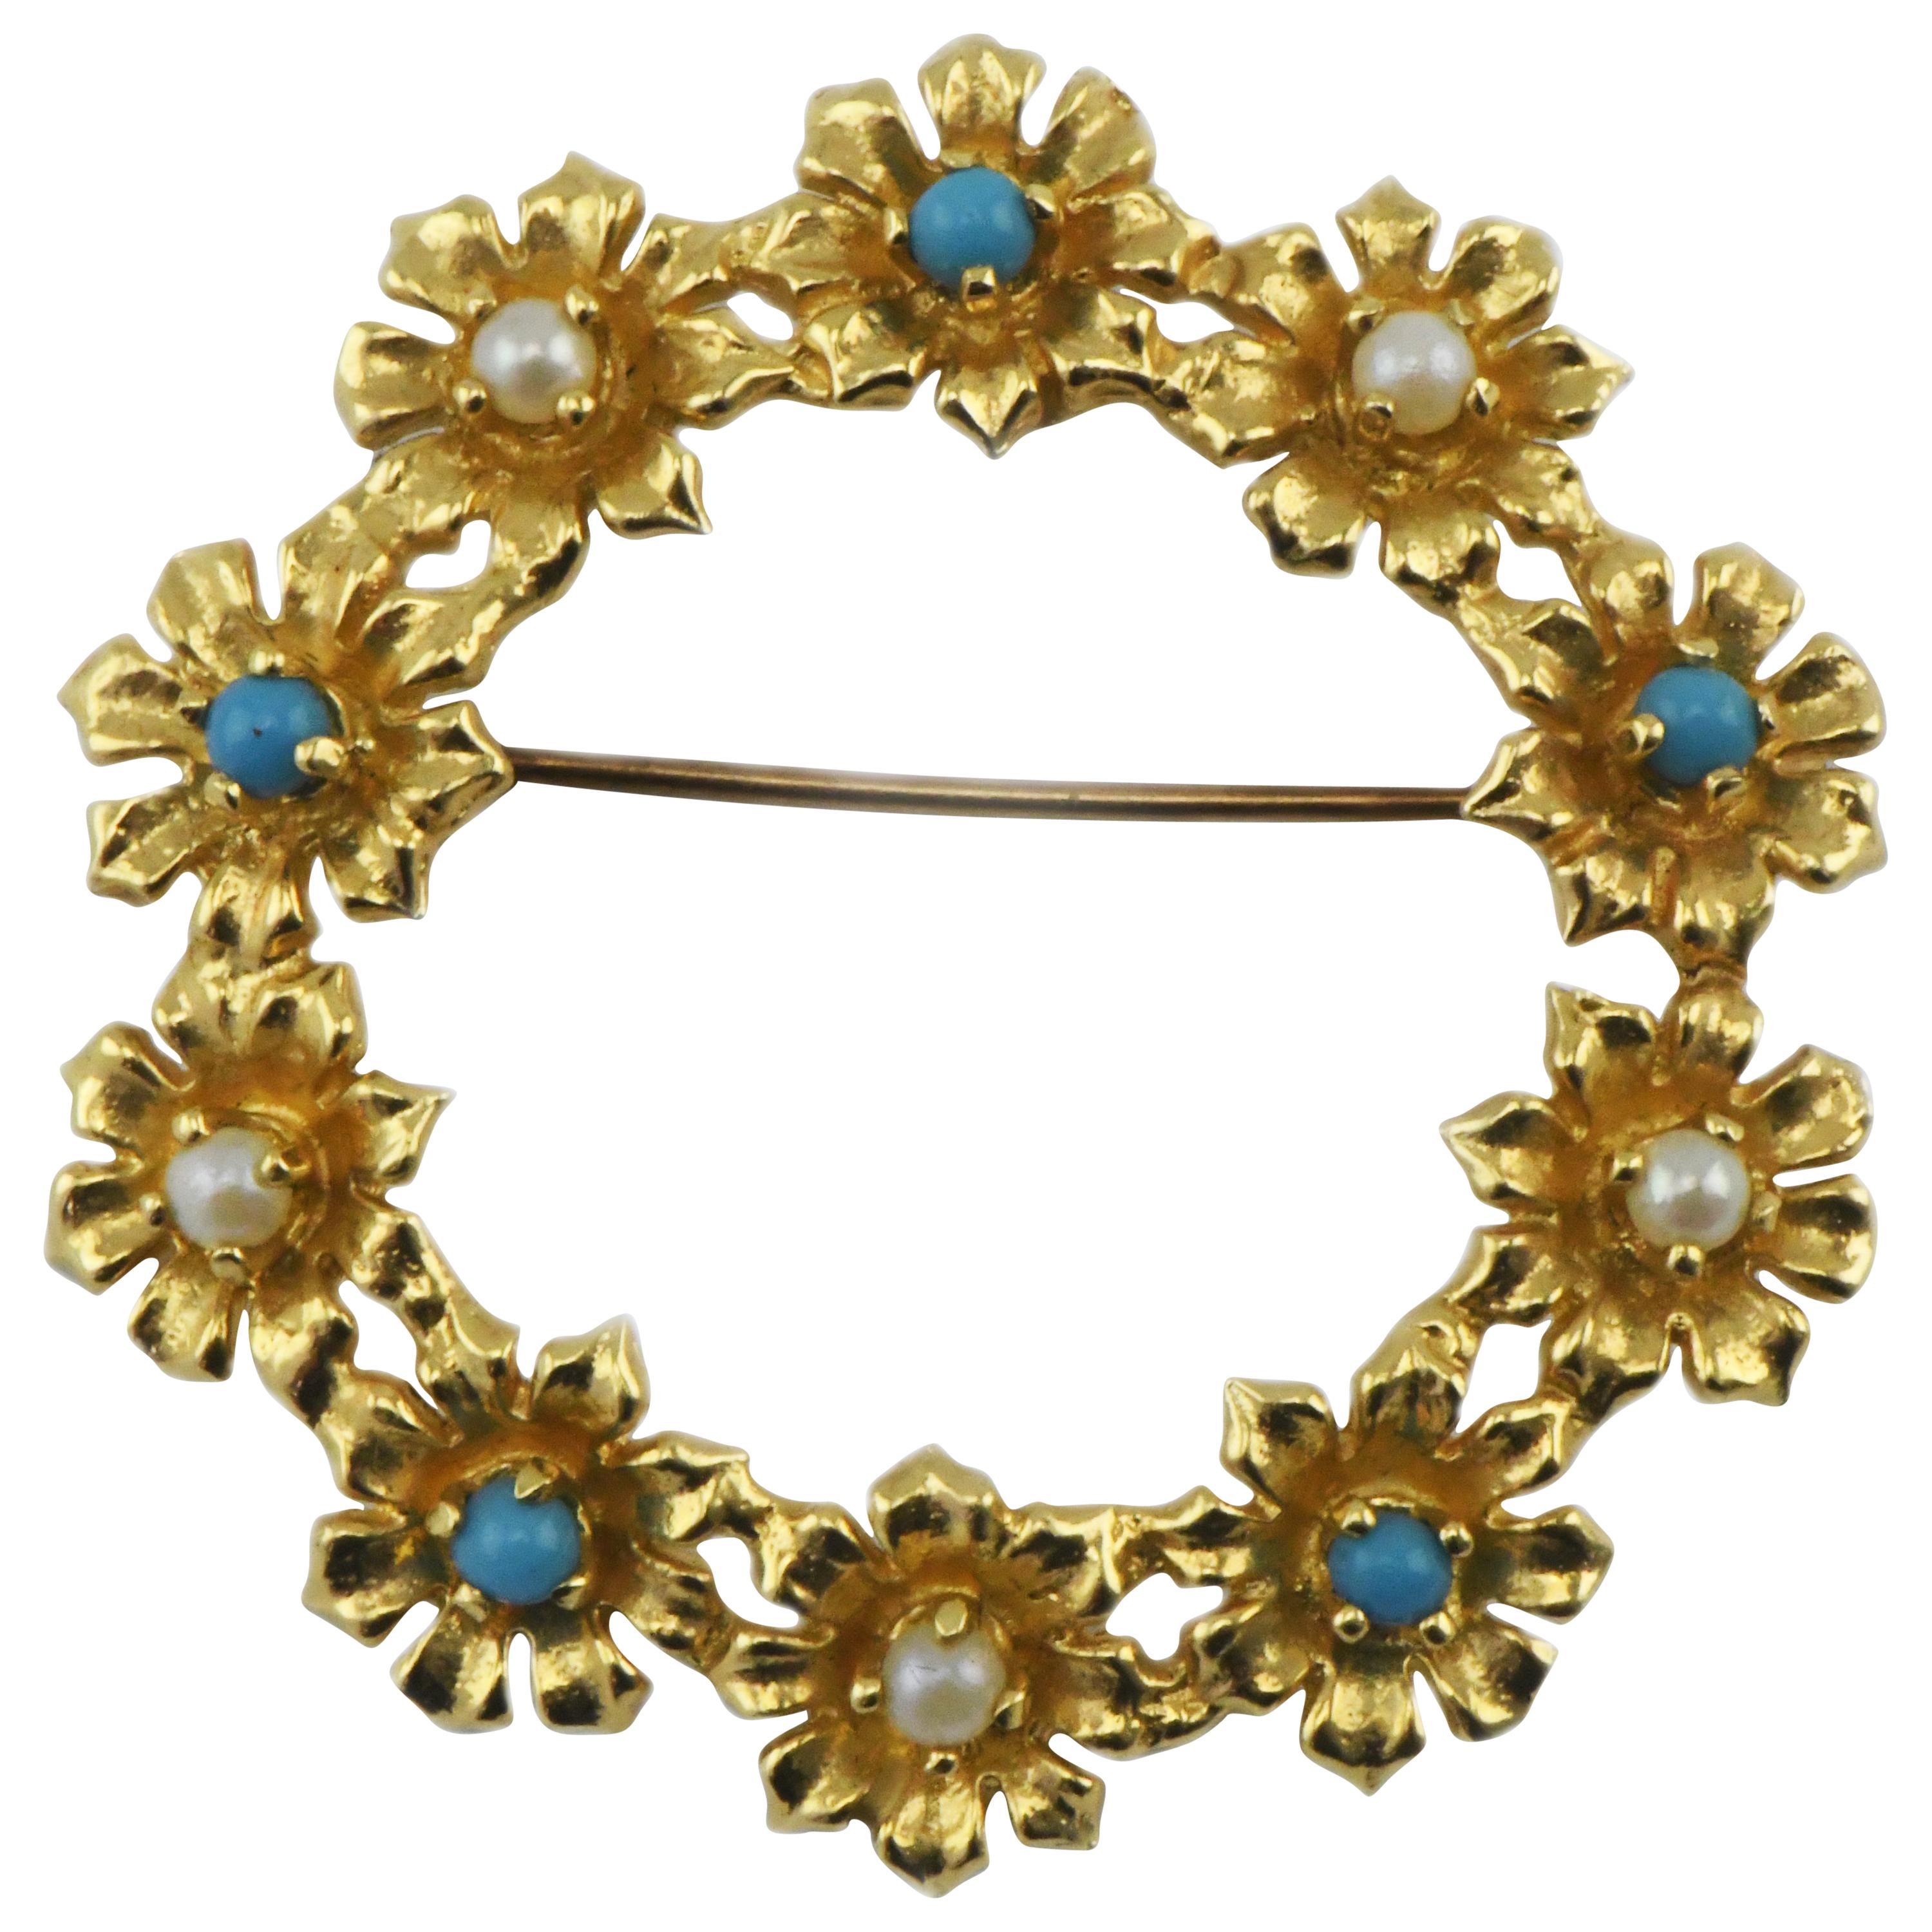 Signed 14 Karat Gold Flower Wreath Brooch Pin with Pearls and Turquoise Accents For Sale